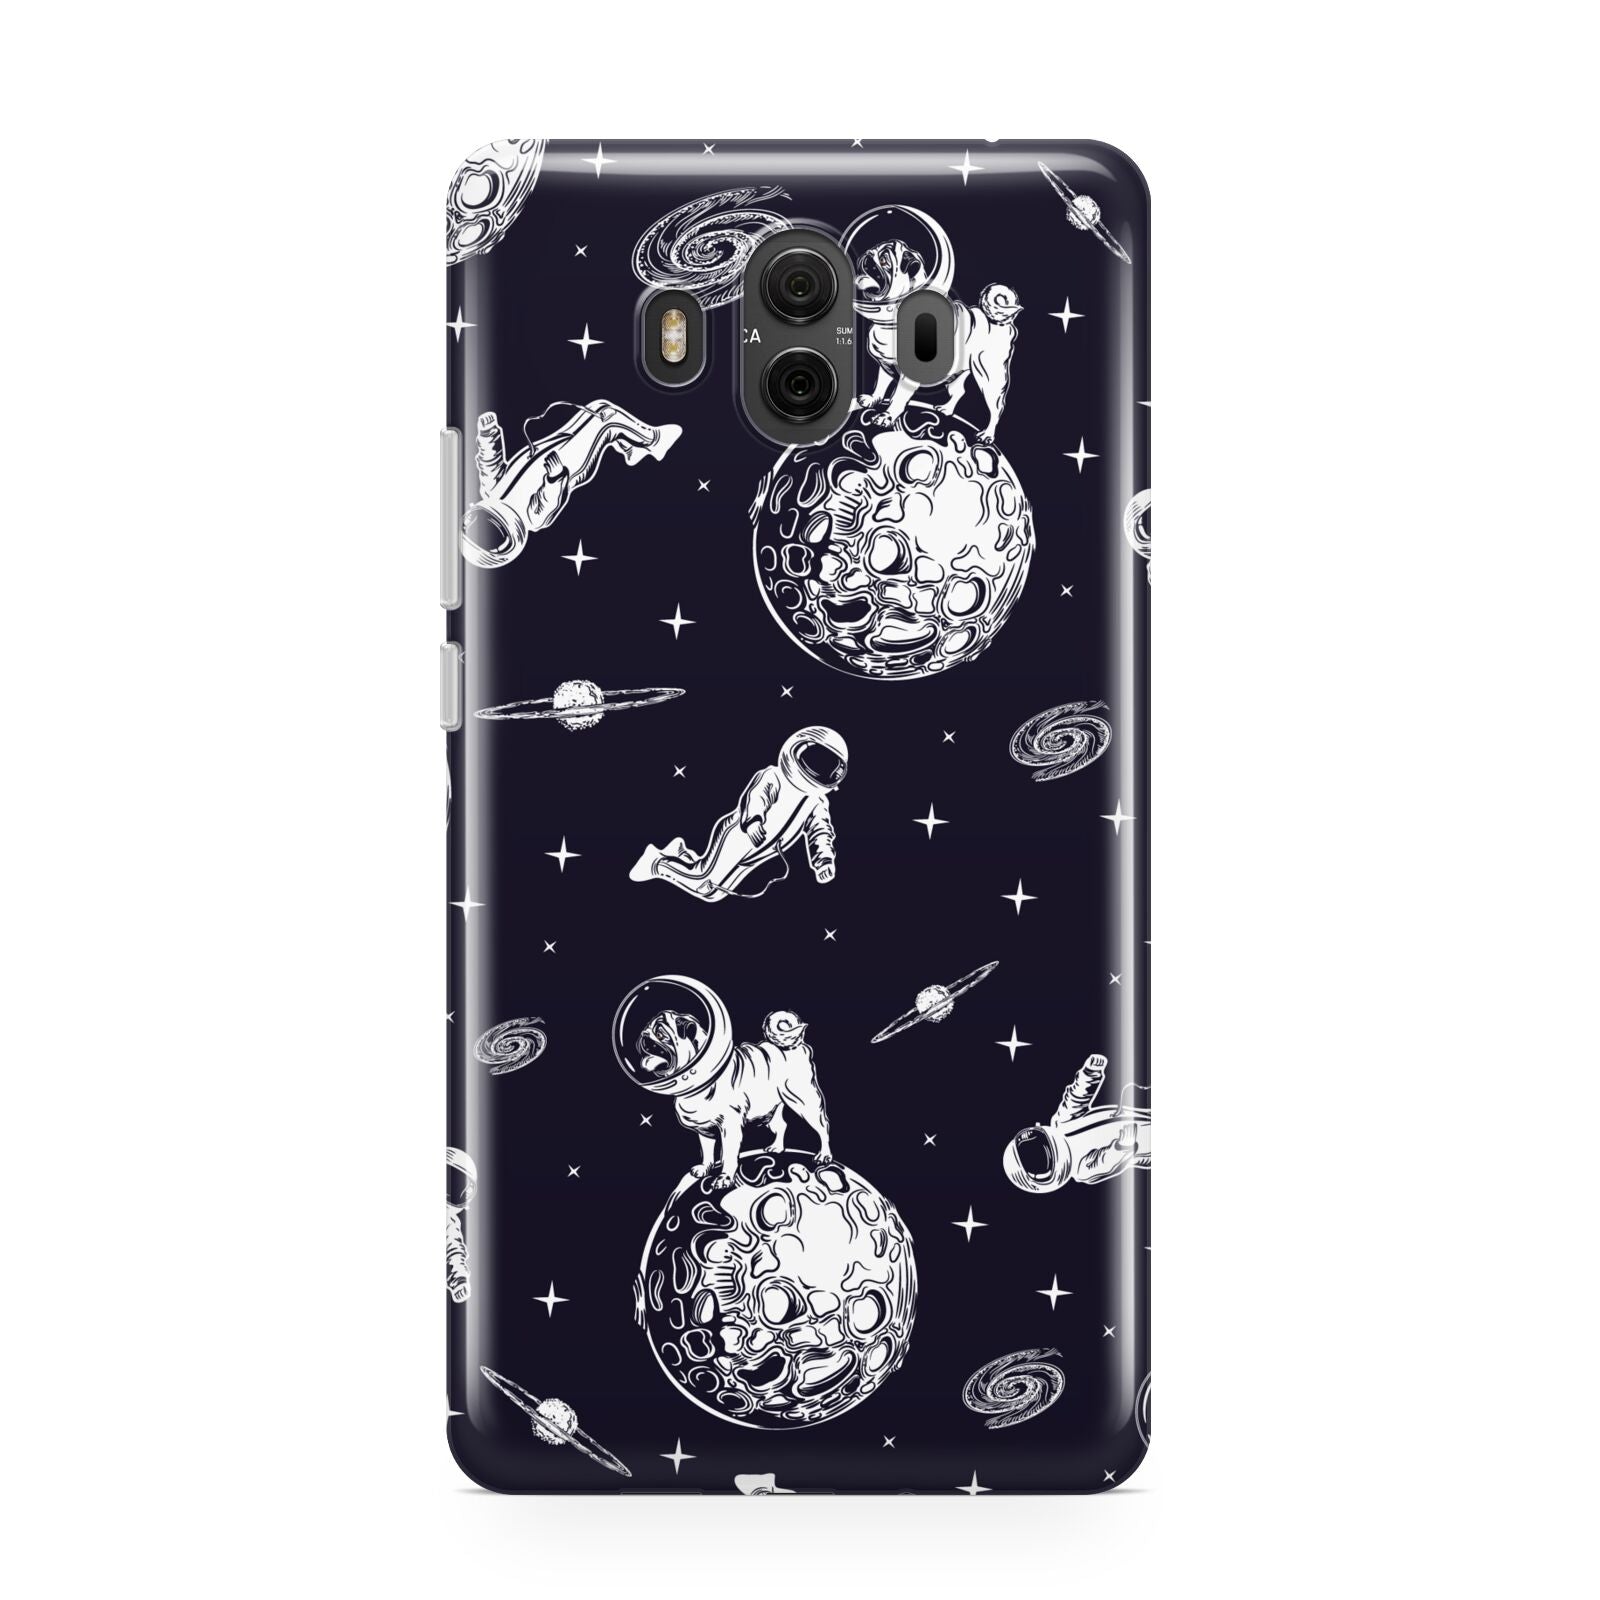 Pug in Space Huawei Mate 10 Protective Phone Case